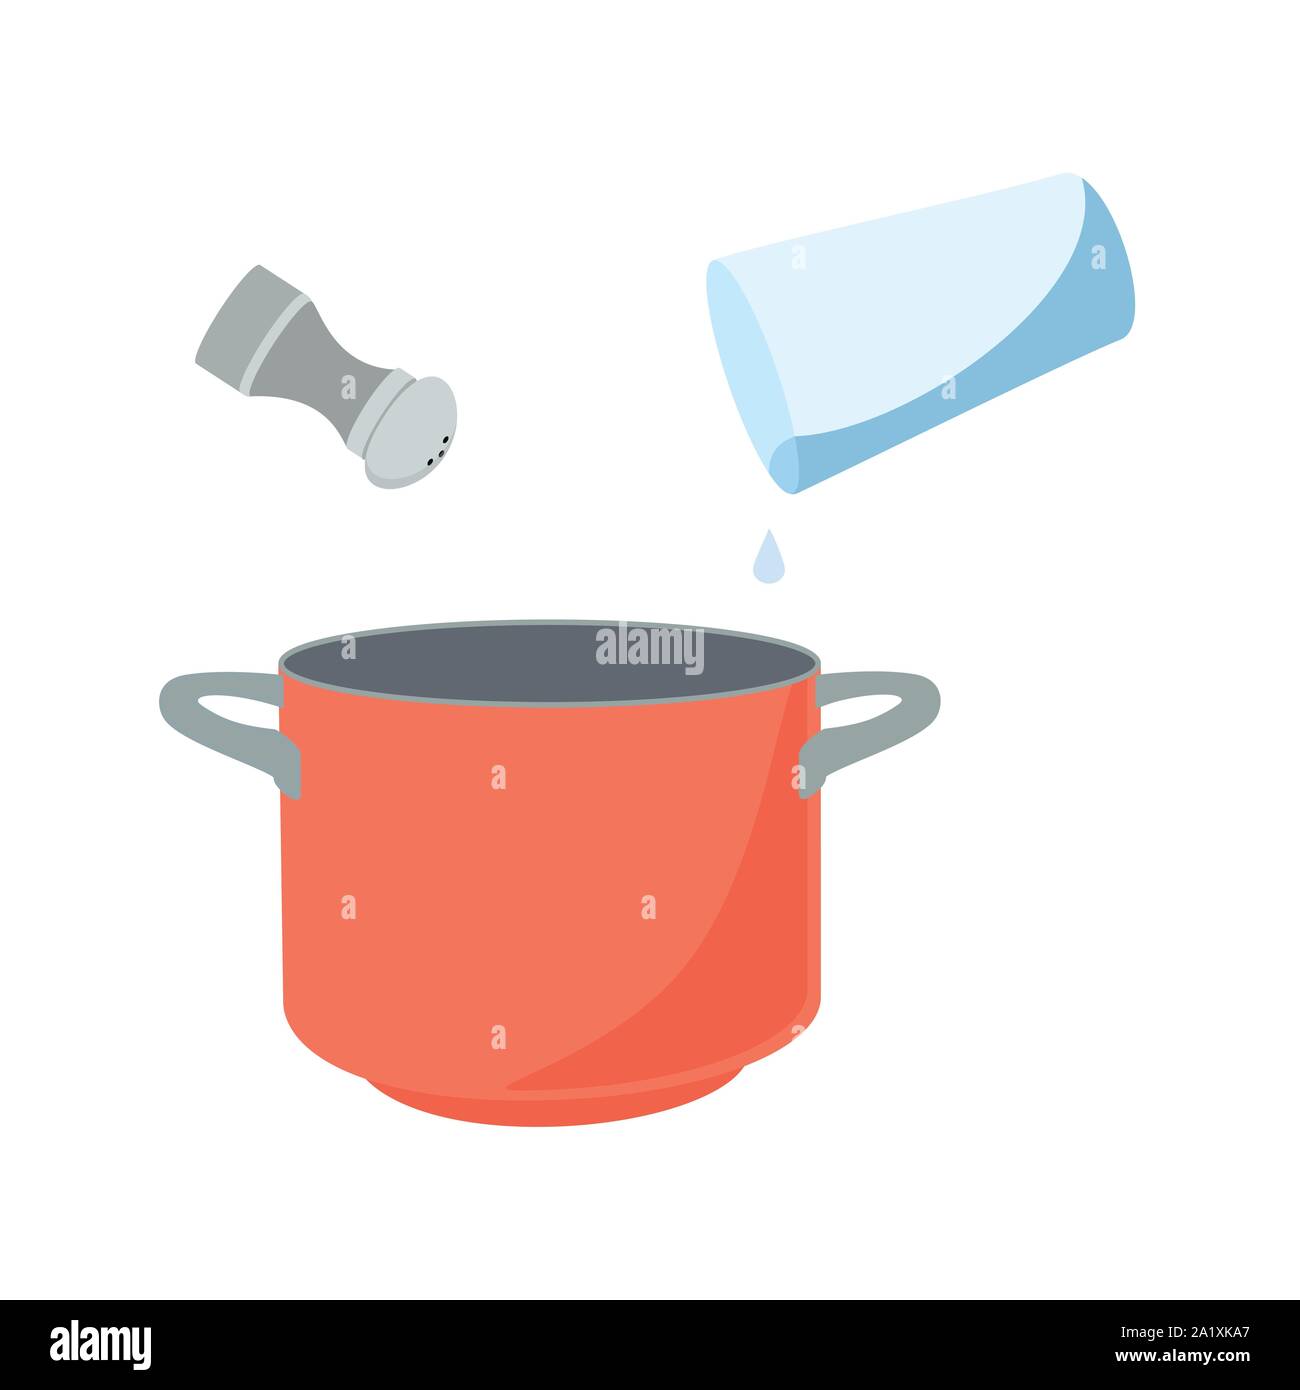 Boiling water in pot Royalty Free Vector Image